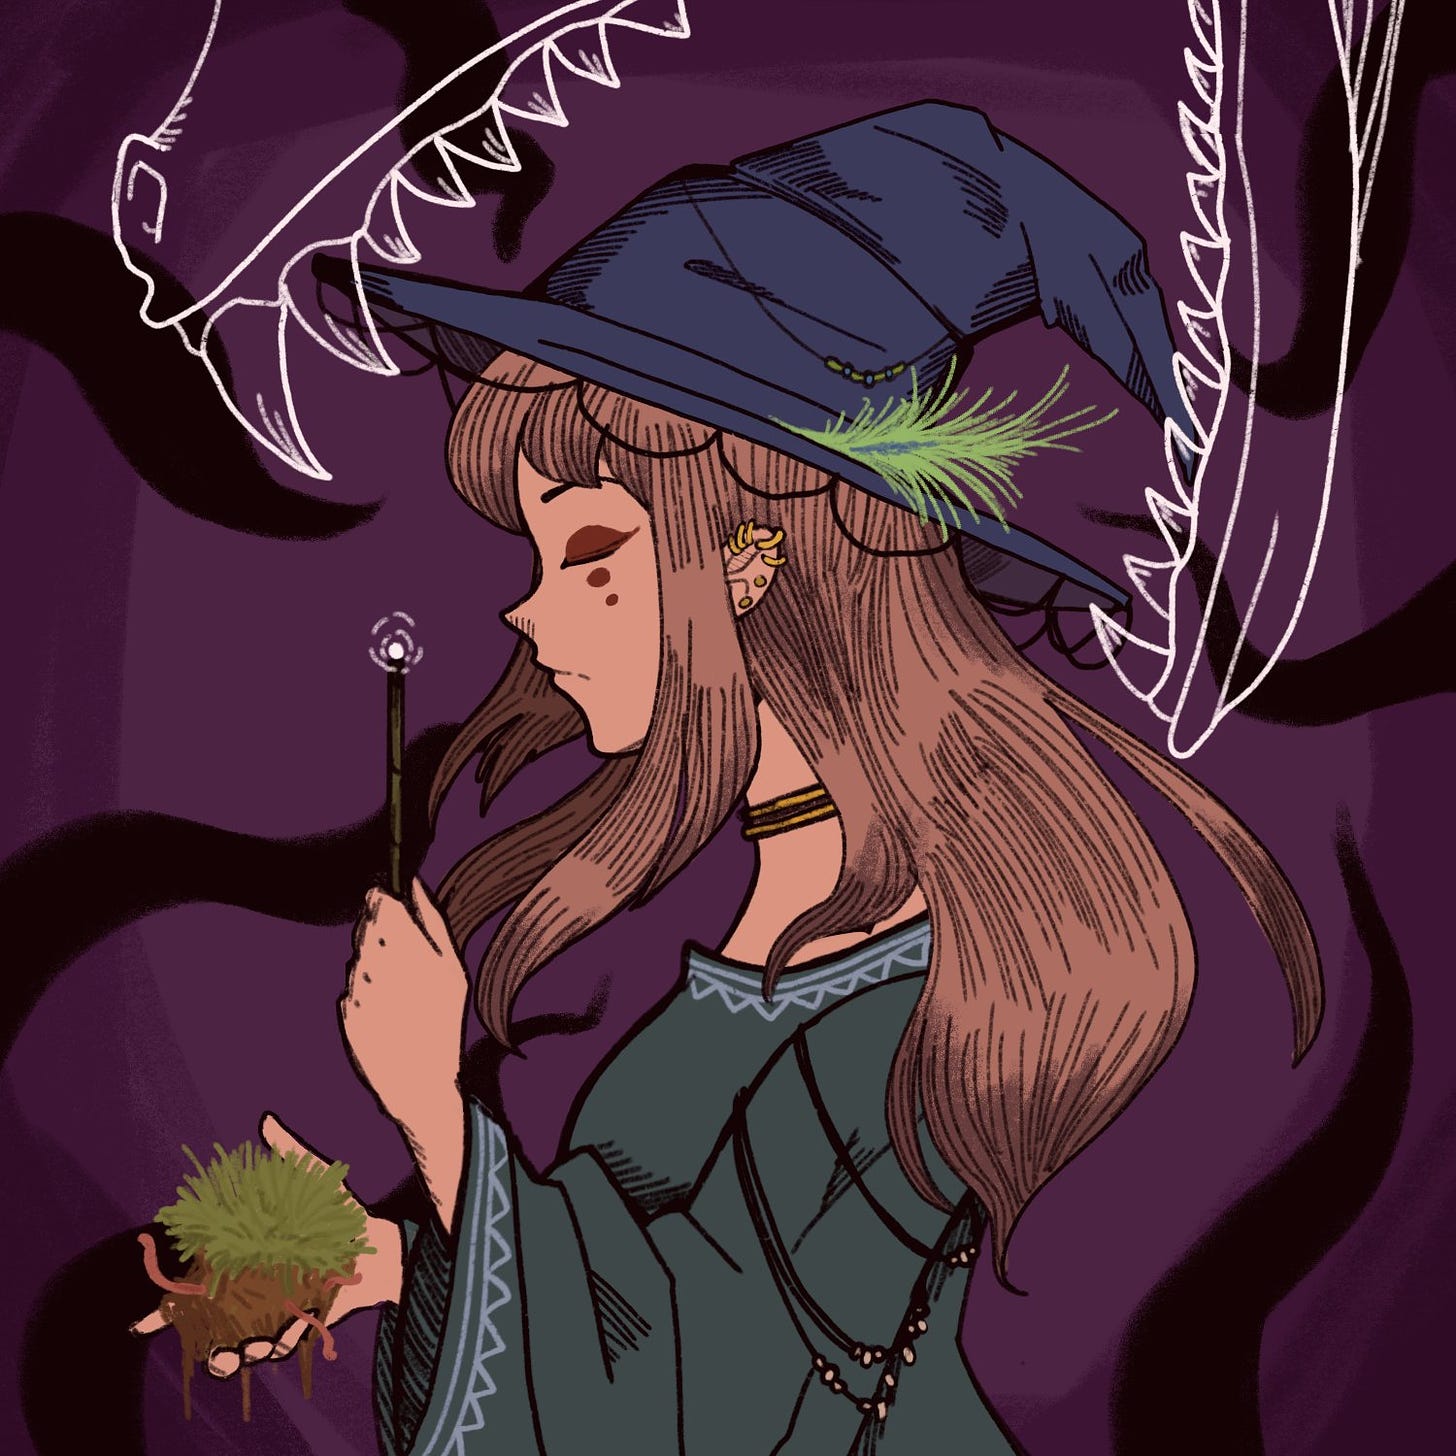 A long-haired witch closes her eyes as a ghostly dragon reaches down to bite her head.